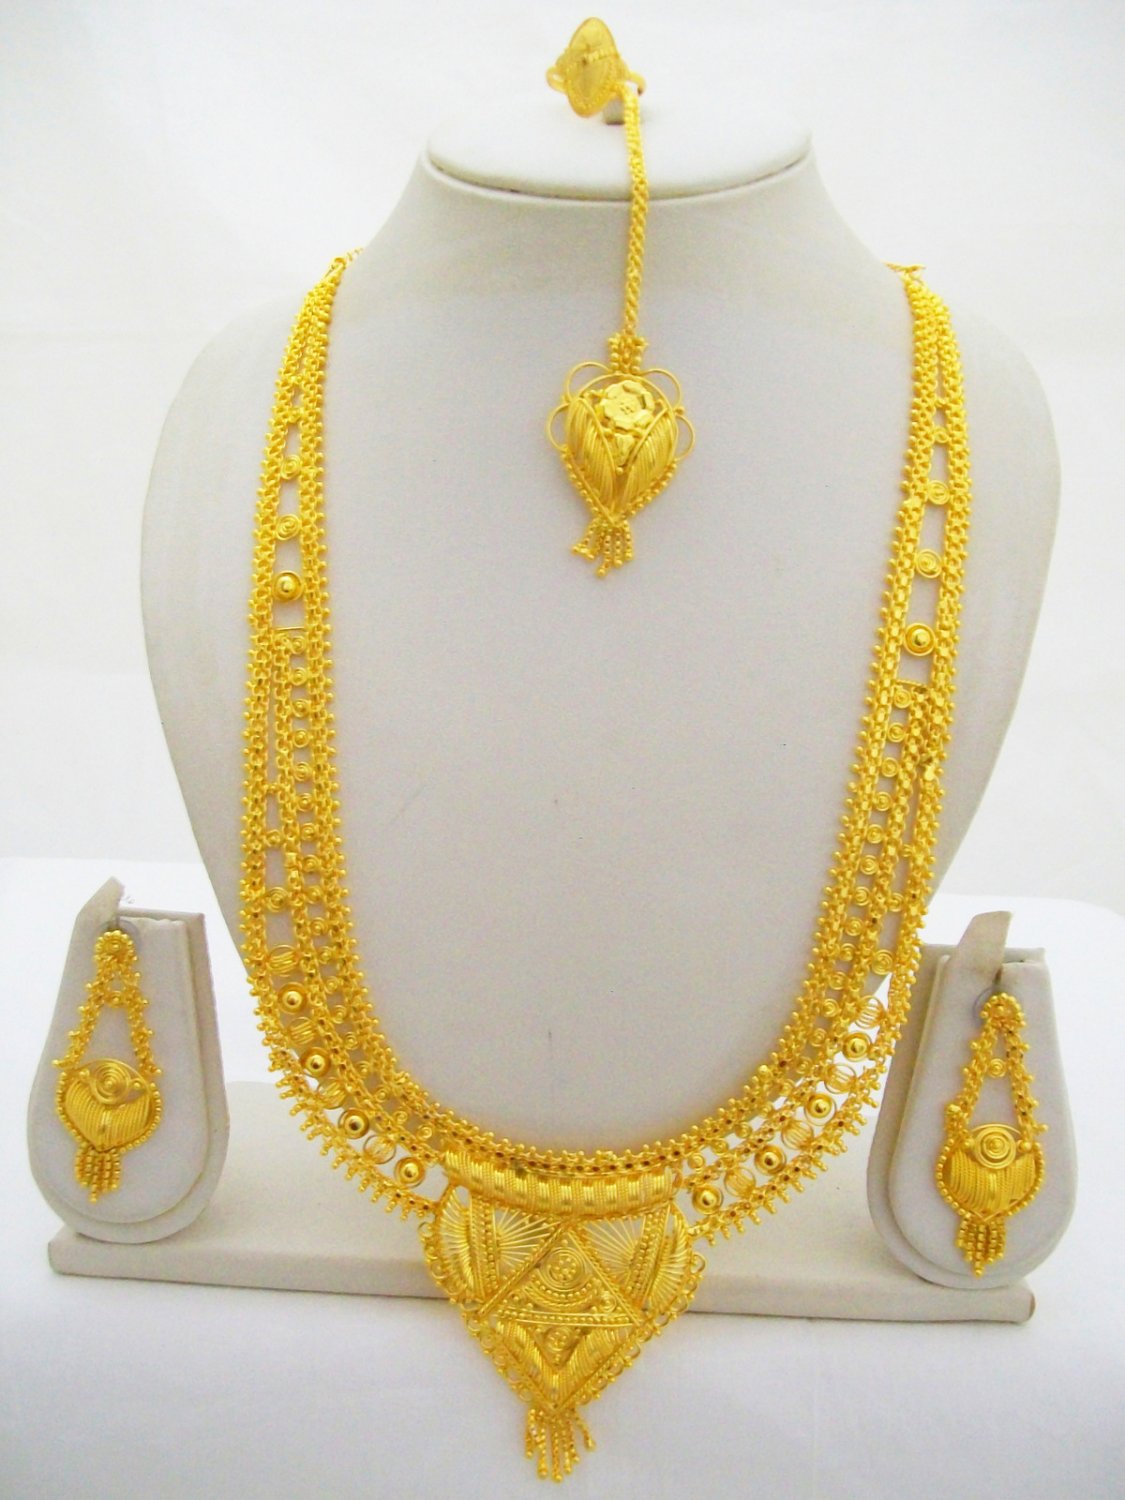 Gold Plated Indian Rani Haar Necklace Bridal Long Filigree Fashion ...